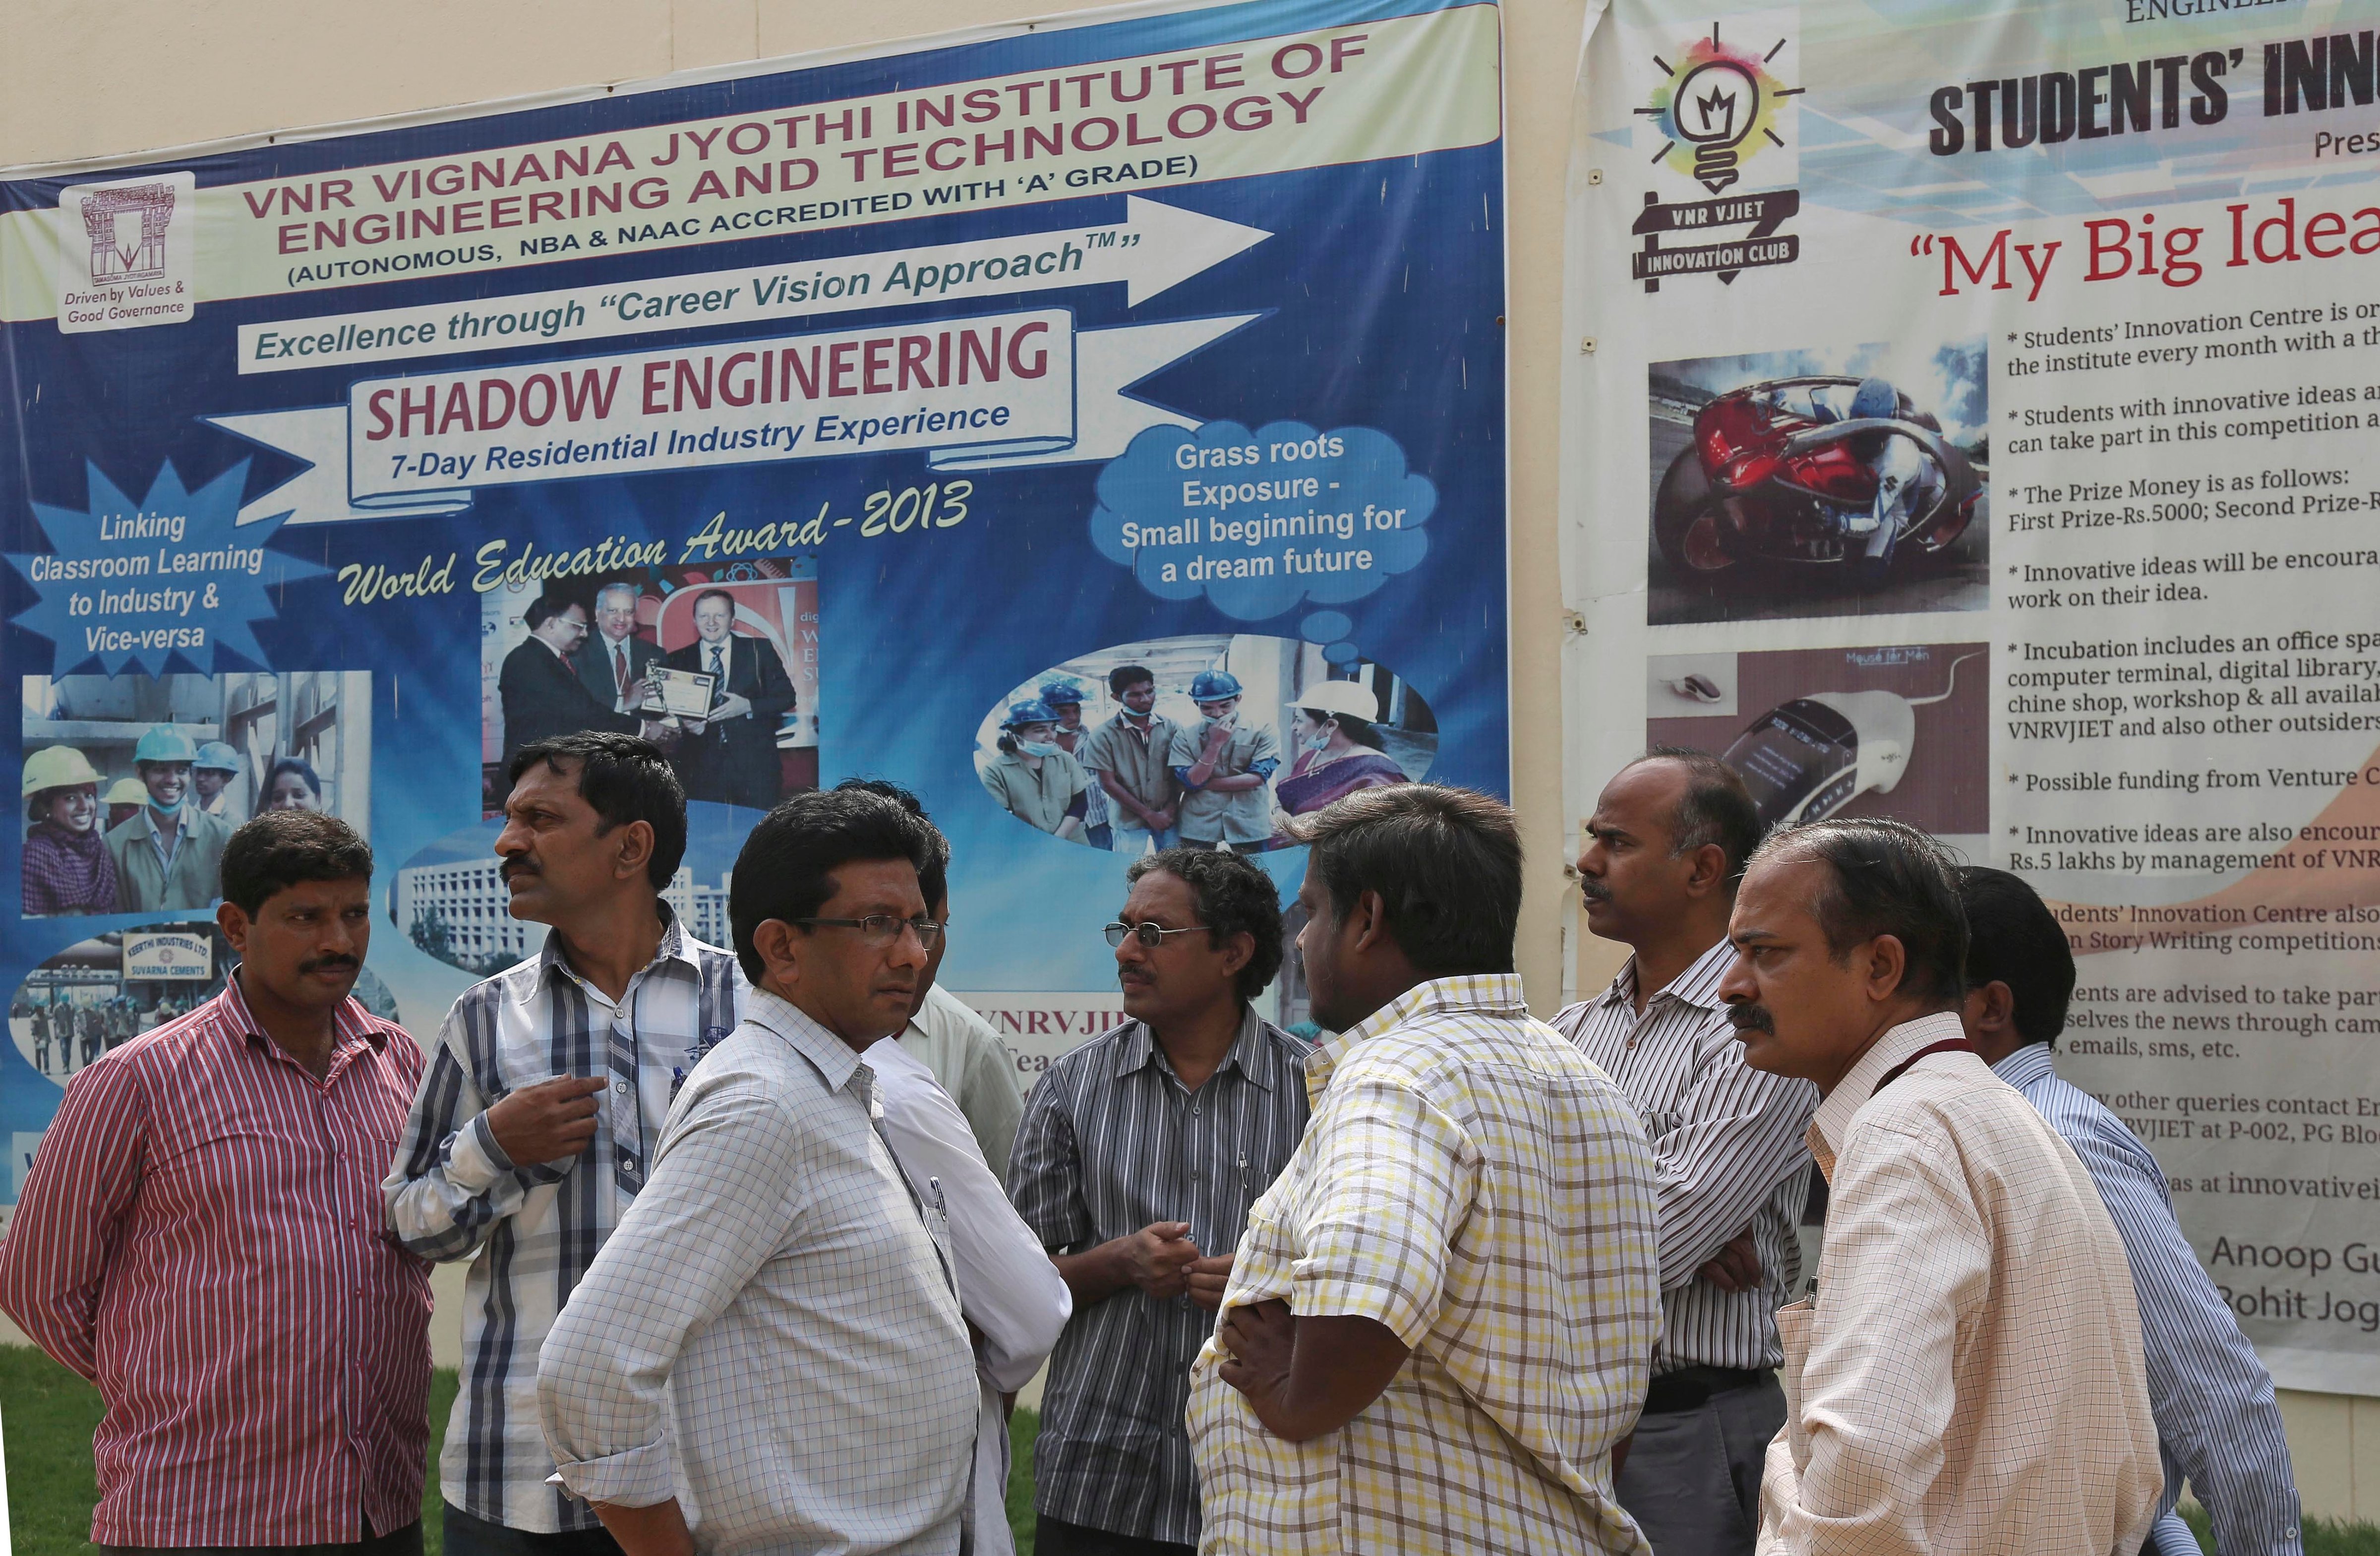 College staff working at VNR Vignana Jyothi Institute of Engineering and Technology gather on campus on the outskirts of Hyderabad, India, on June 9, 2014 (Mahesh Kumar —AP)